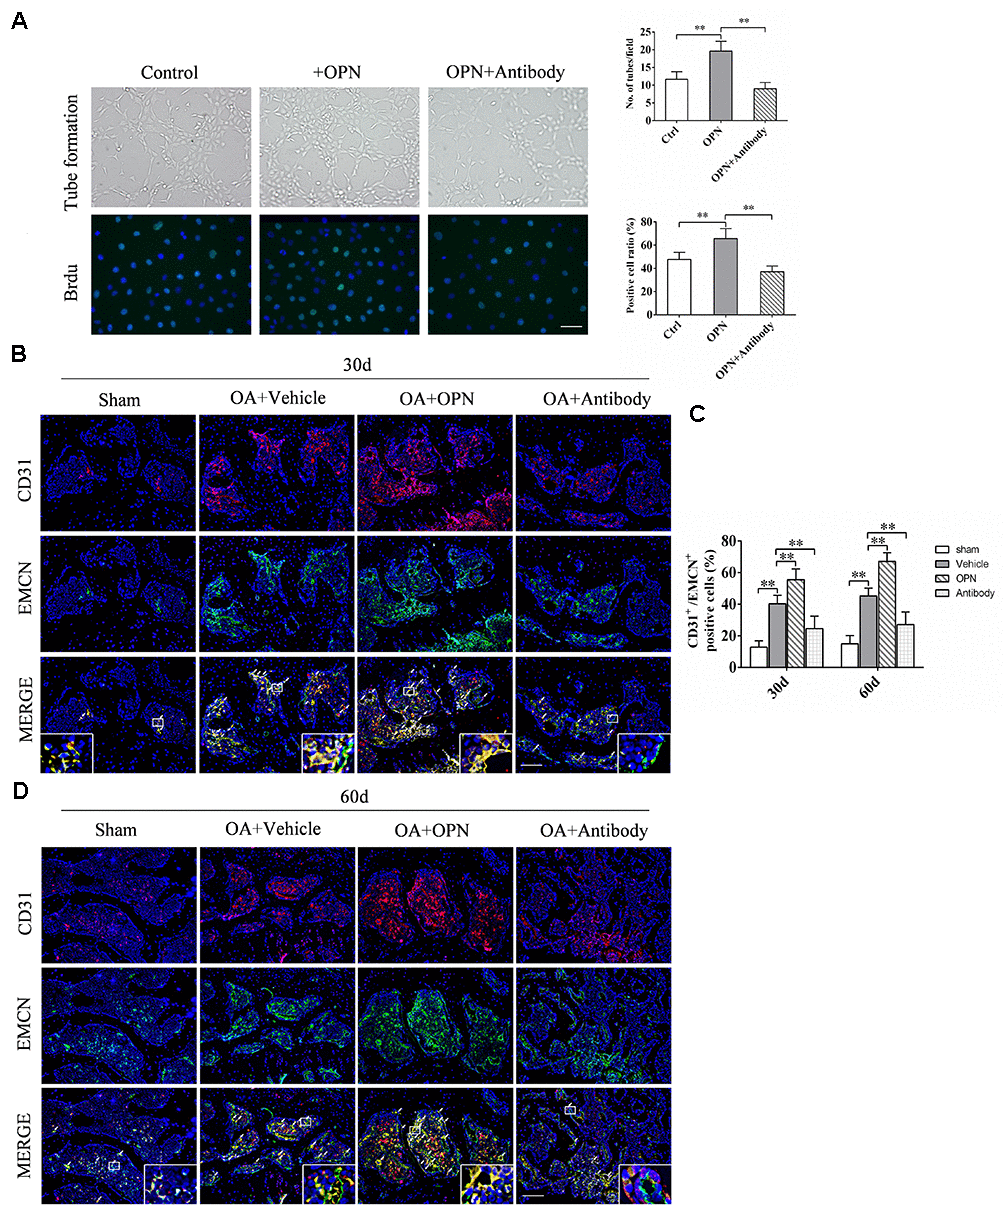 OPN promotes the formation of h-type vessels in subchondral bone of OA. (A) HUVECs were treated with rmOPN (100 ng/mL) and neutralizing antibody (1.0 μg/mL) for 24 h, and tubes were measured using a tube formation assay; scale bars = 100 μm, n = 6. (B) Representative images and quantitative analysis of Brdu (green) immunofluorescence in HUVECs treated with rmOPN (100 ng/mL) and neutralizing antibody (1.0 μg/mL) for 24 h; scale bars = 25 μm, n = 6. (C, D) Representative images and quantitative analysis of CD31 and Endomucin (EMCN) co-immunostaining in tibial subchondral bone of an OA mouse model treated with vehicle, rmOPN or neutralizing antibody, and sham group. Positive cells were indicated with arrows. Boxed area is magnified in the corner. Scale bars = 50 μm. Data are shown as mean ± s. d. and were analyzed by one-way ANOVA, n = 6, *P .